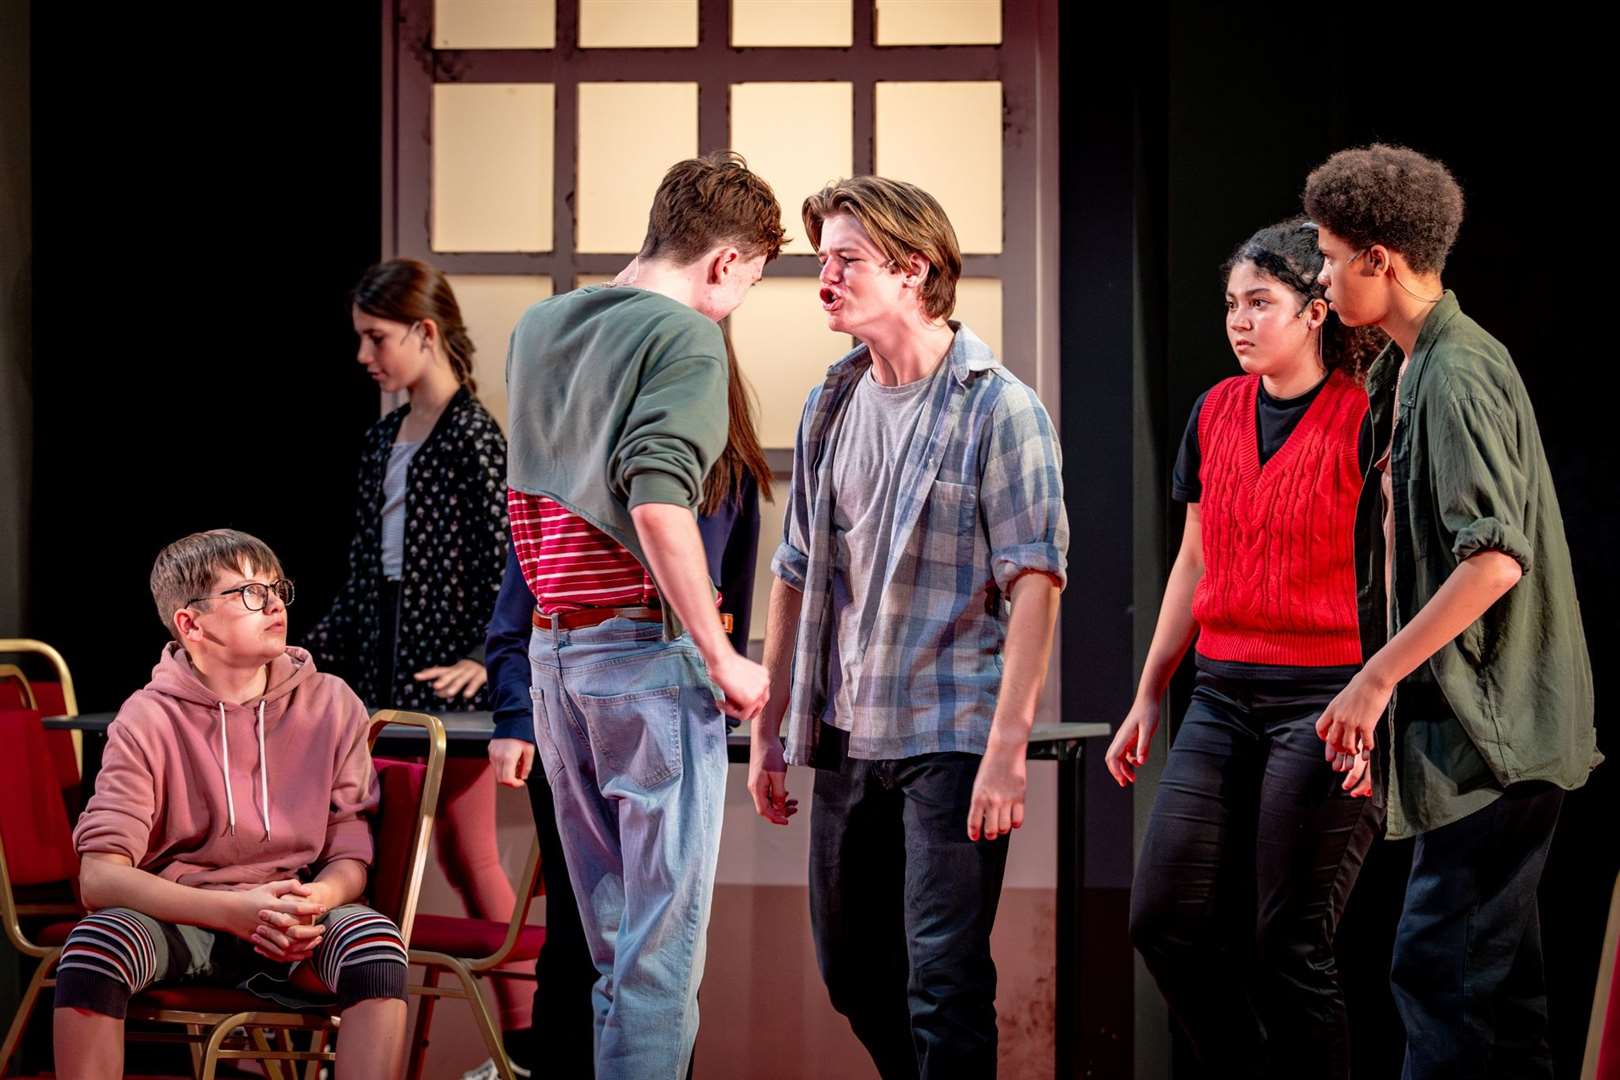 The teens making their theatrical debut charmed the audience, admittedly a large percentage of the crowd were direct relatives. Picture: The Marlowe Theatre/Steve Gregson